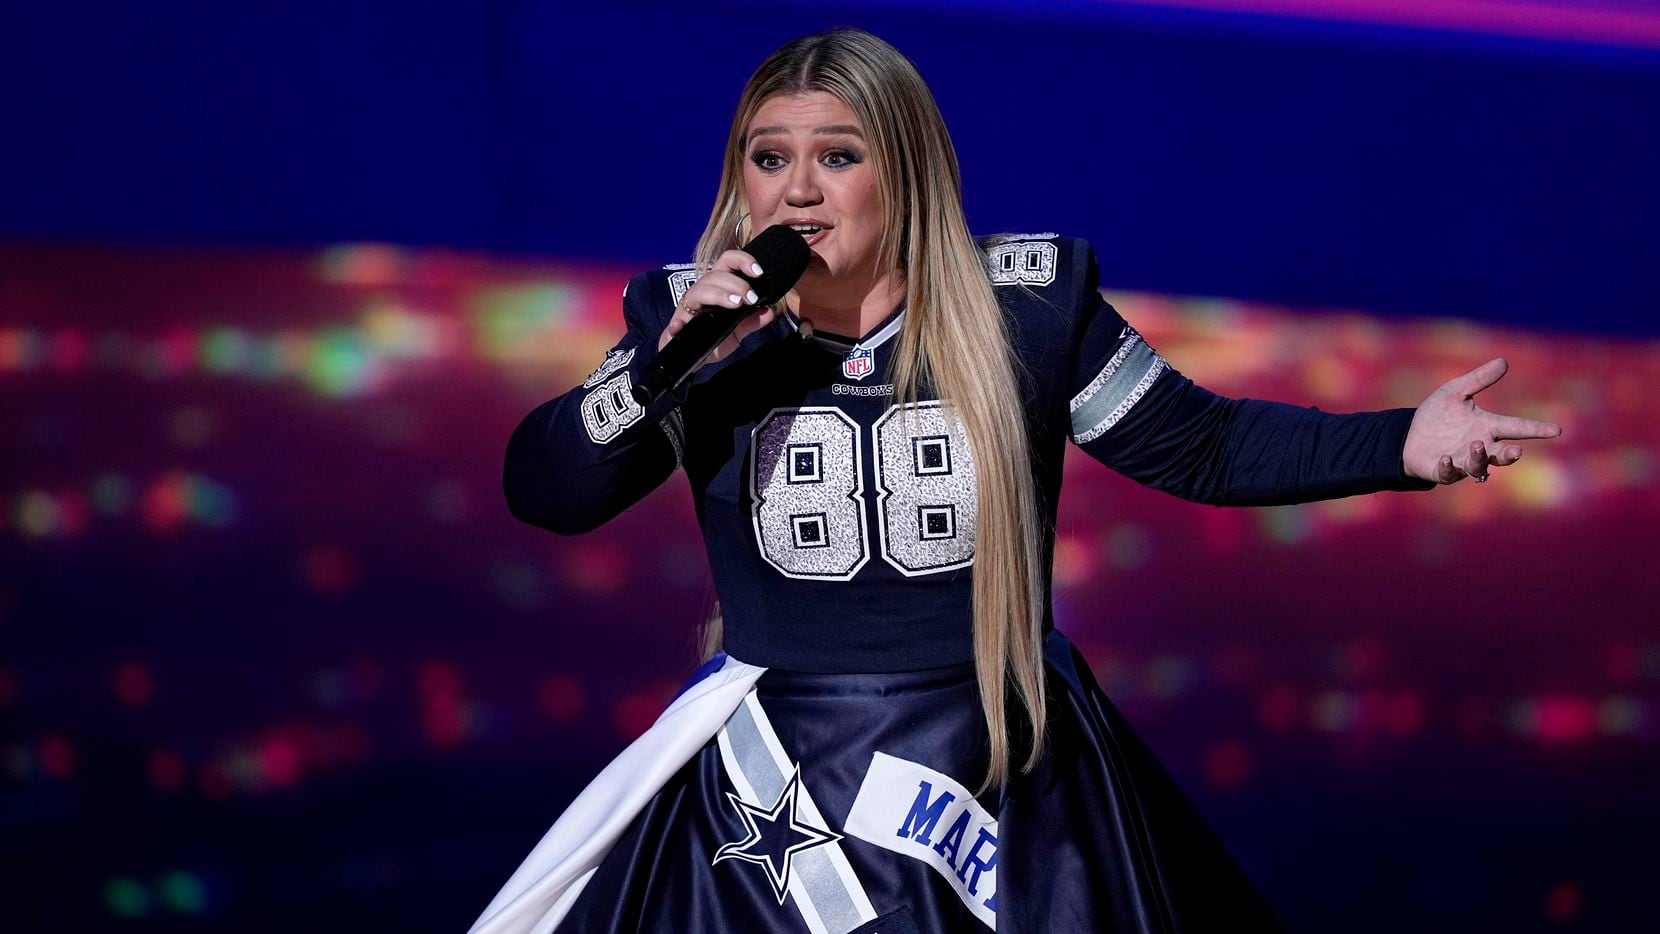 Kelly Clarkson’s Dallas Cowboys-themed gown steals the show at the NFL